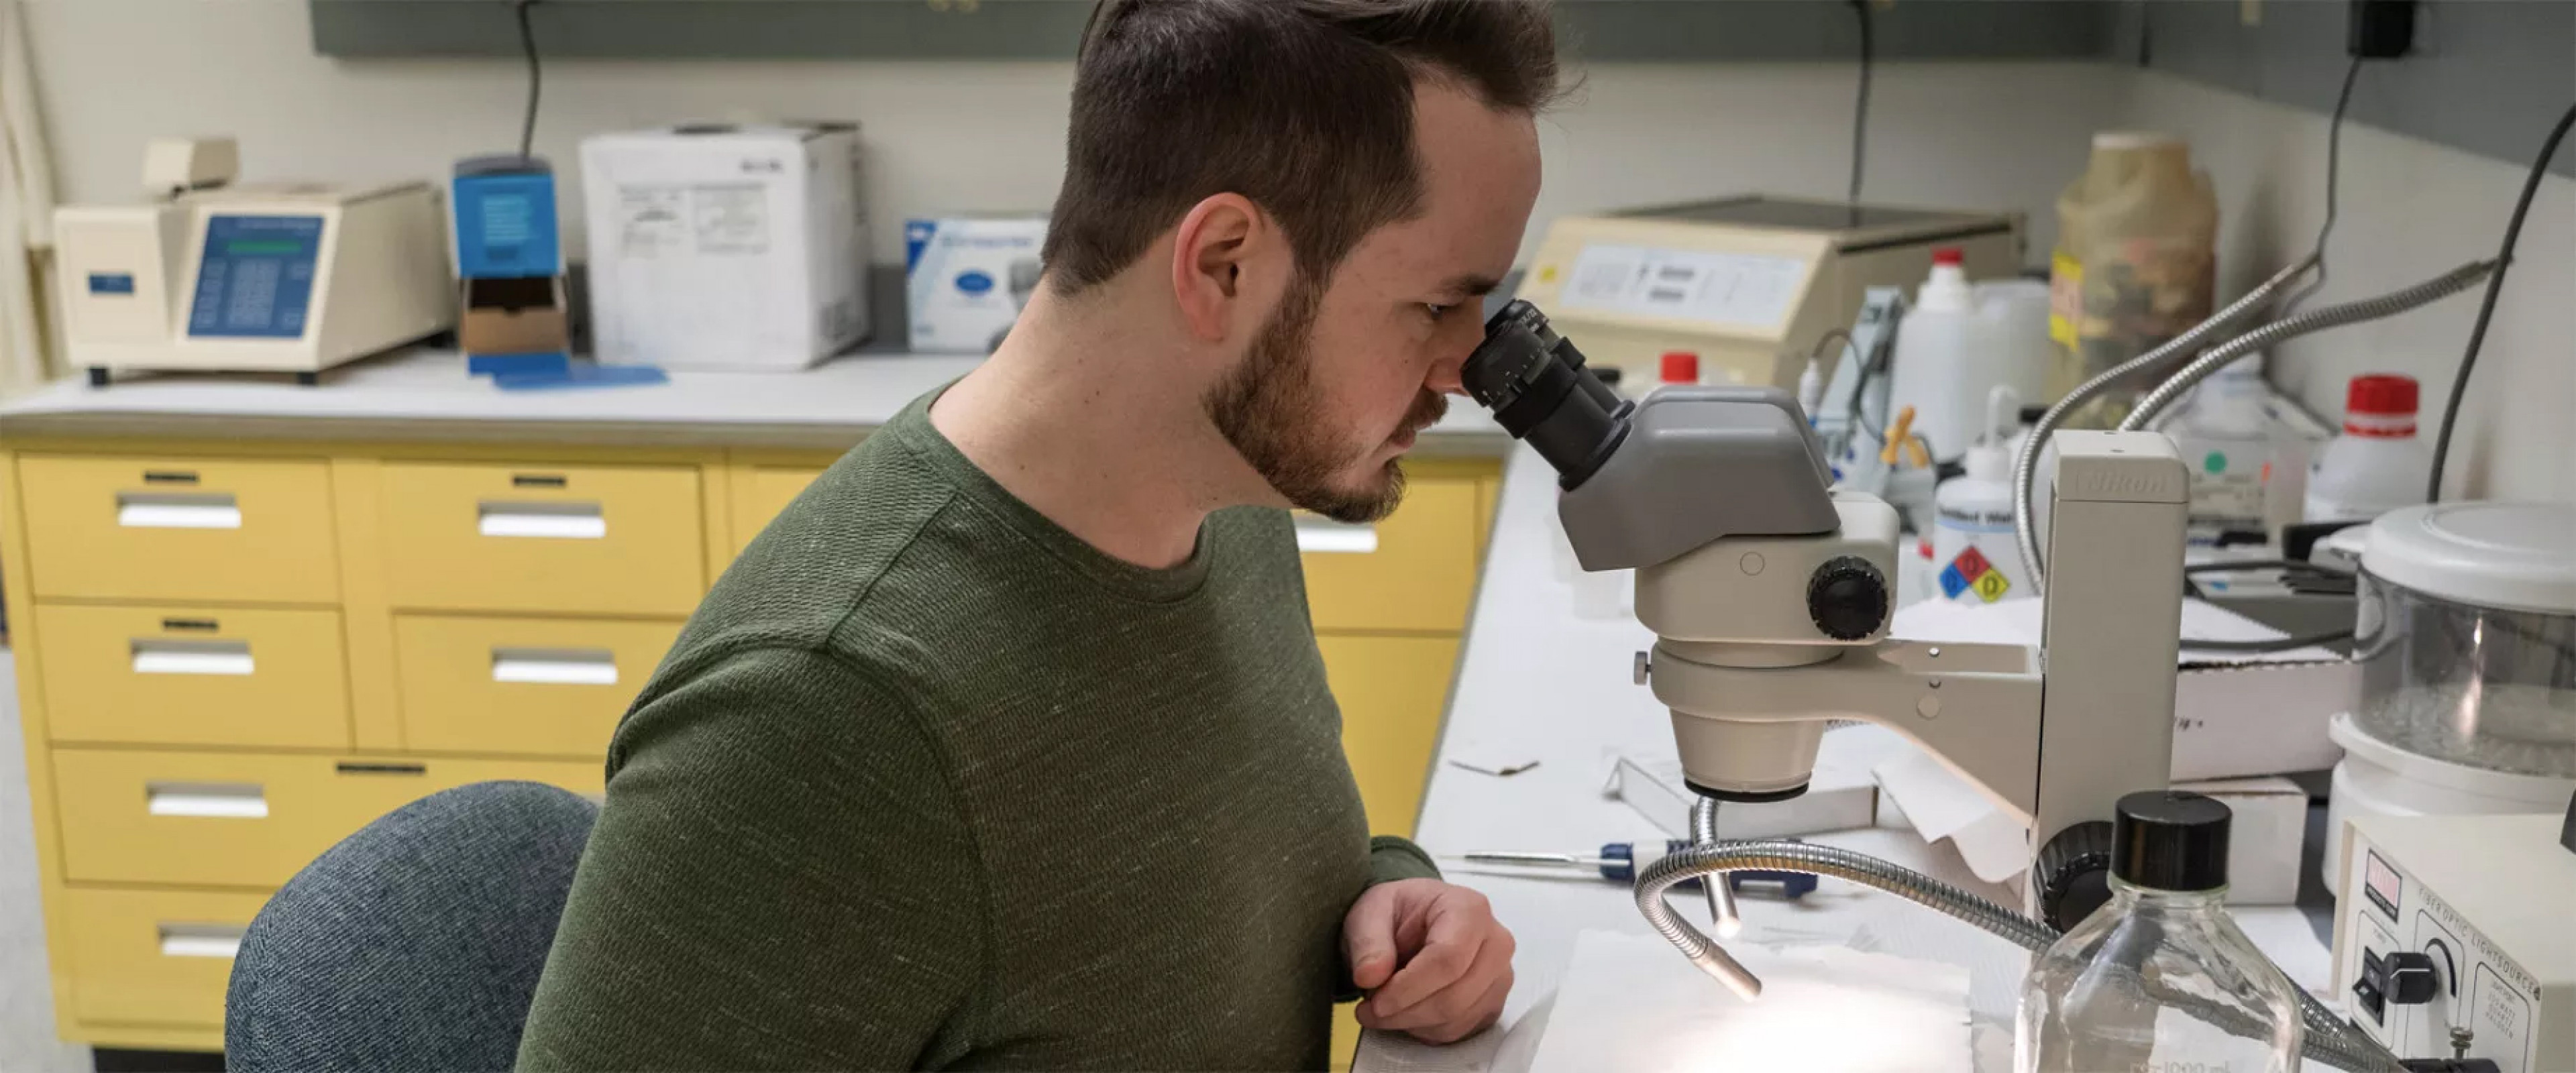 Student sitting in lab using a microscope